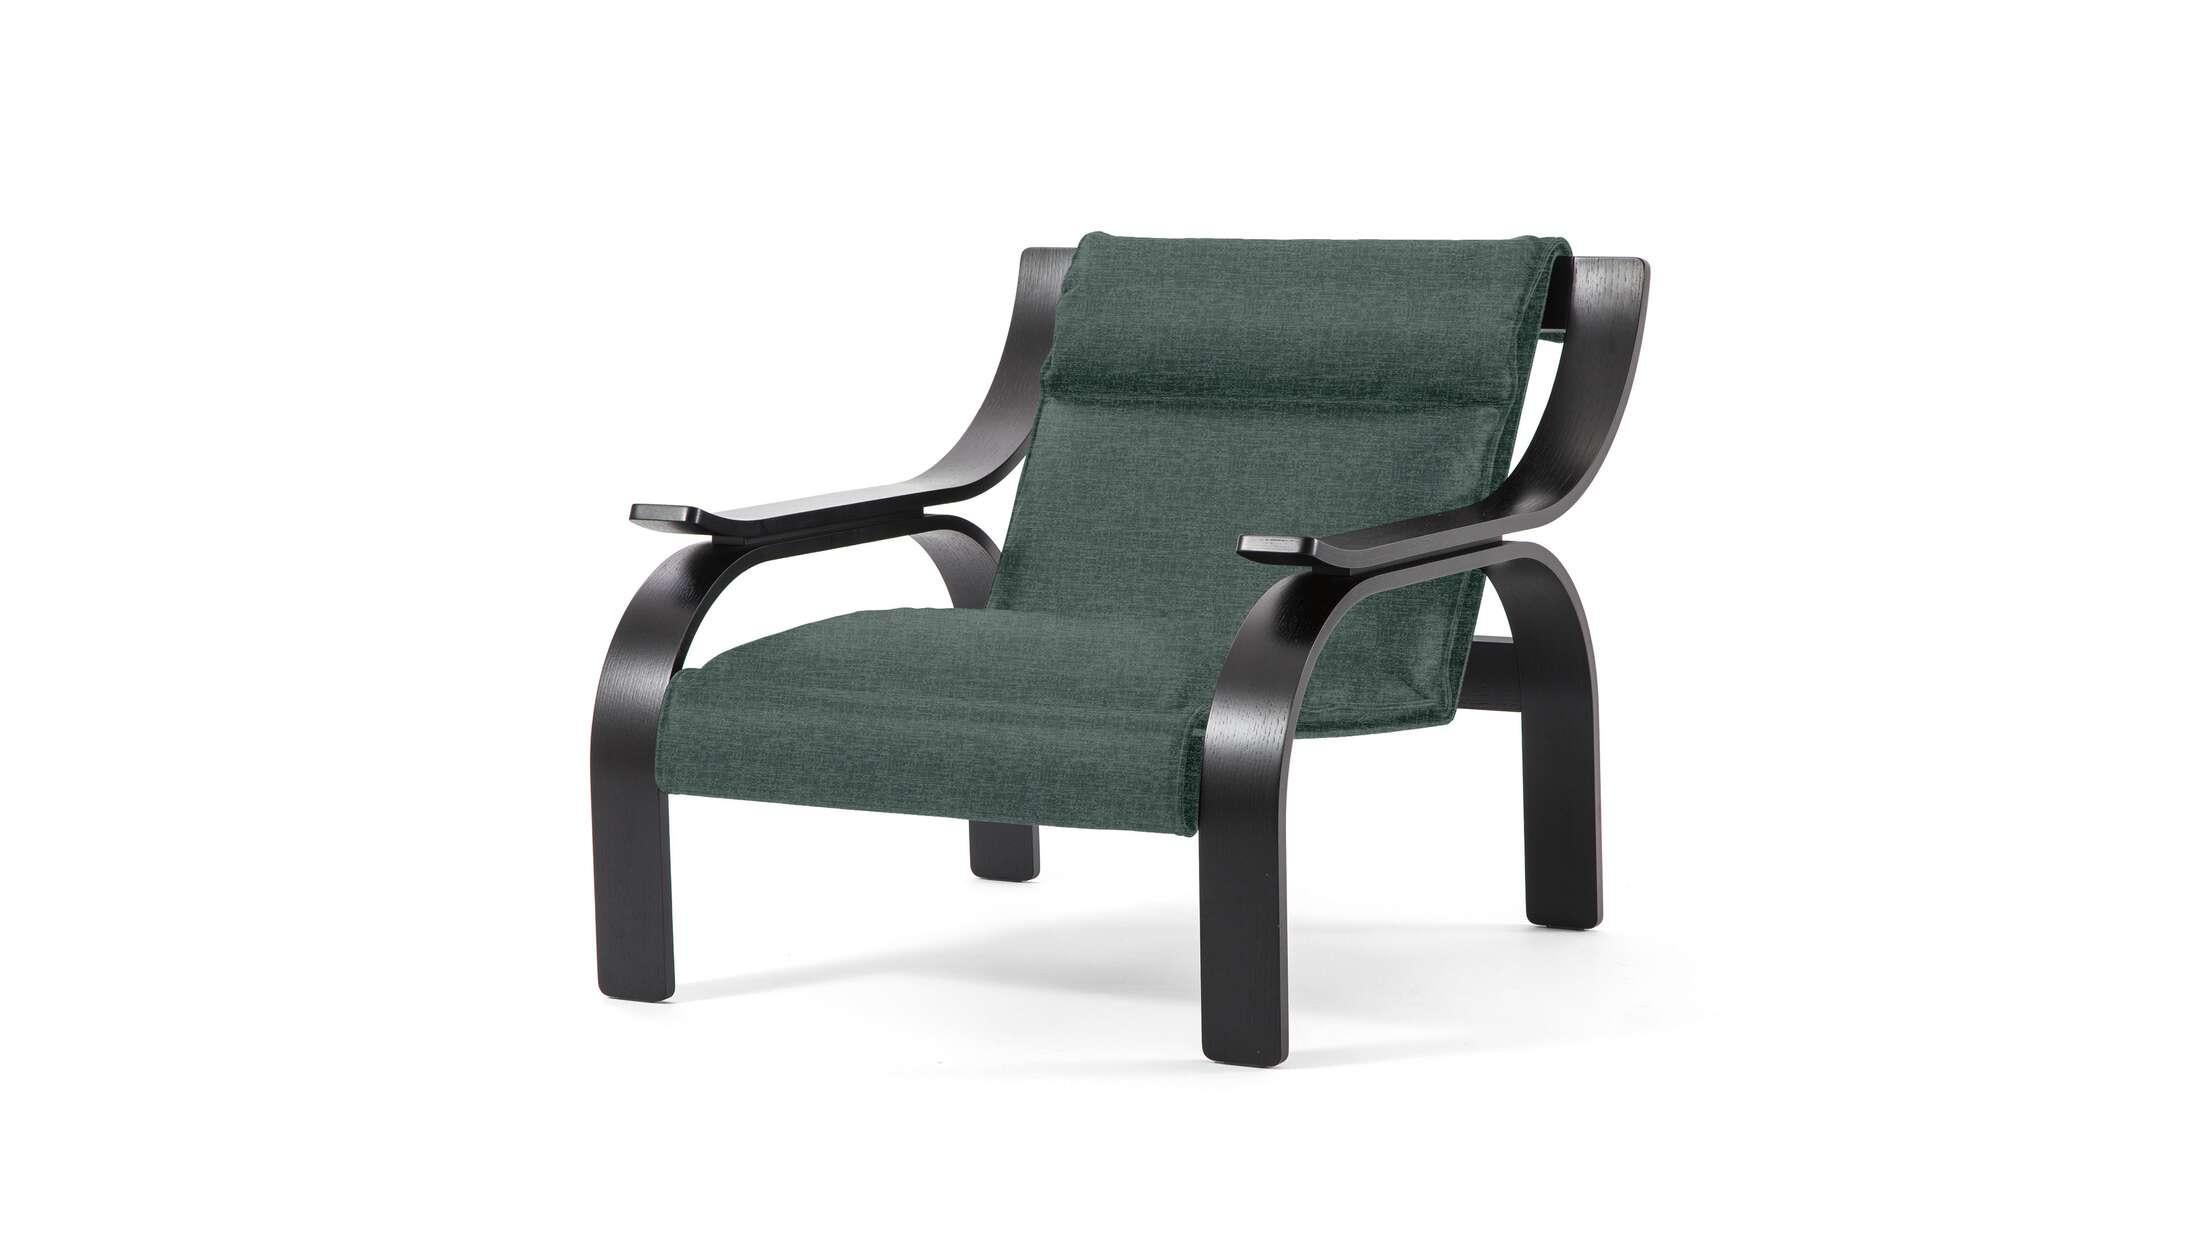 Armchair designed by Marco Zanuso in 1964, relaunched in 2015. Manufactured by Cassina in Italy. Please ask for pricing in other materials and colors. The seat is available in leather or fabric, the base can be made of walnut or black stained ash. 
 